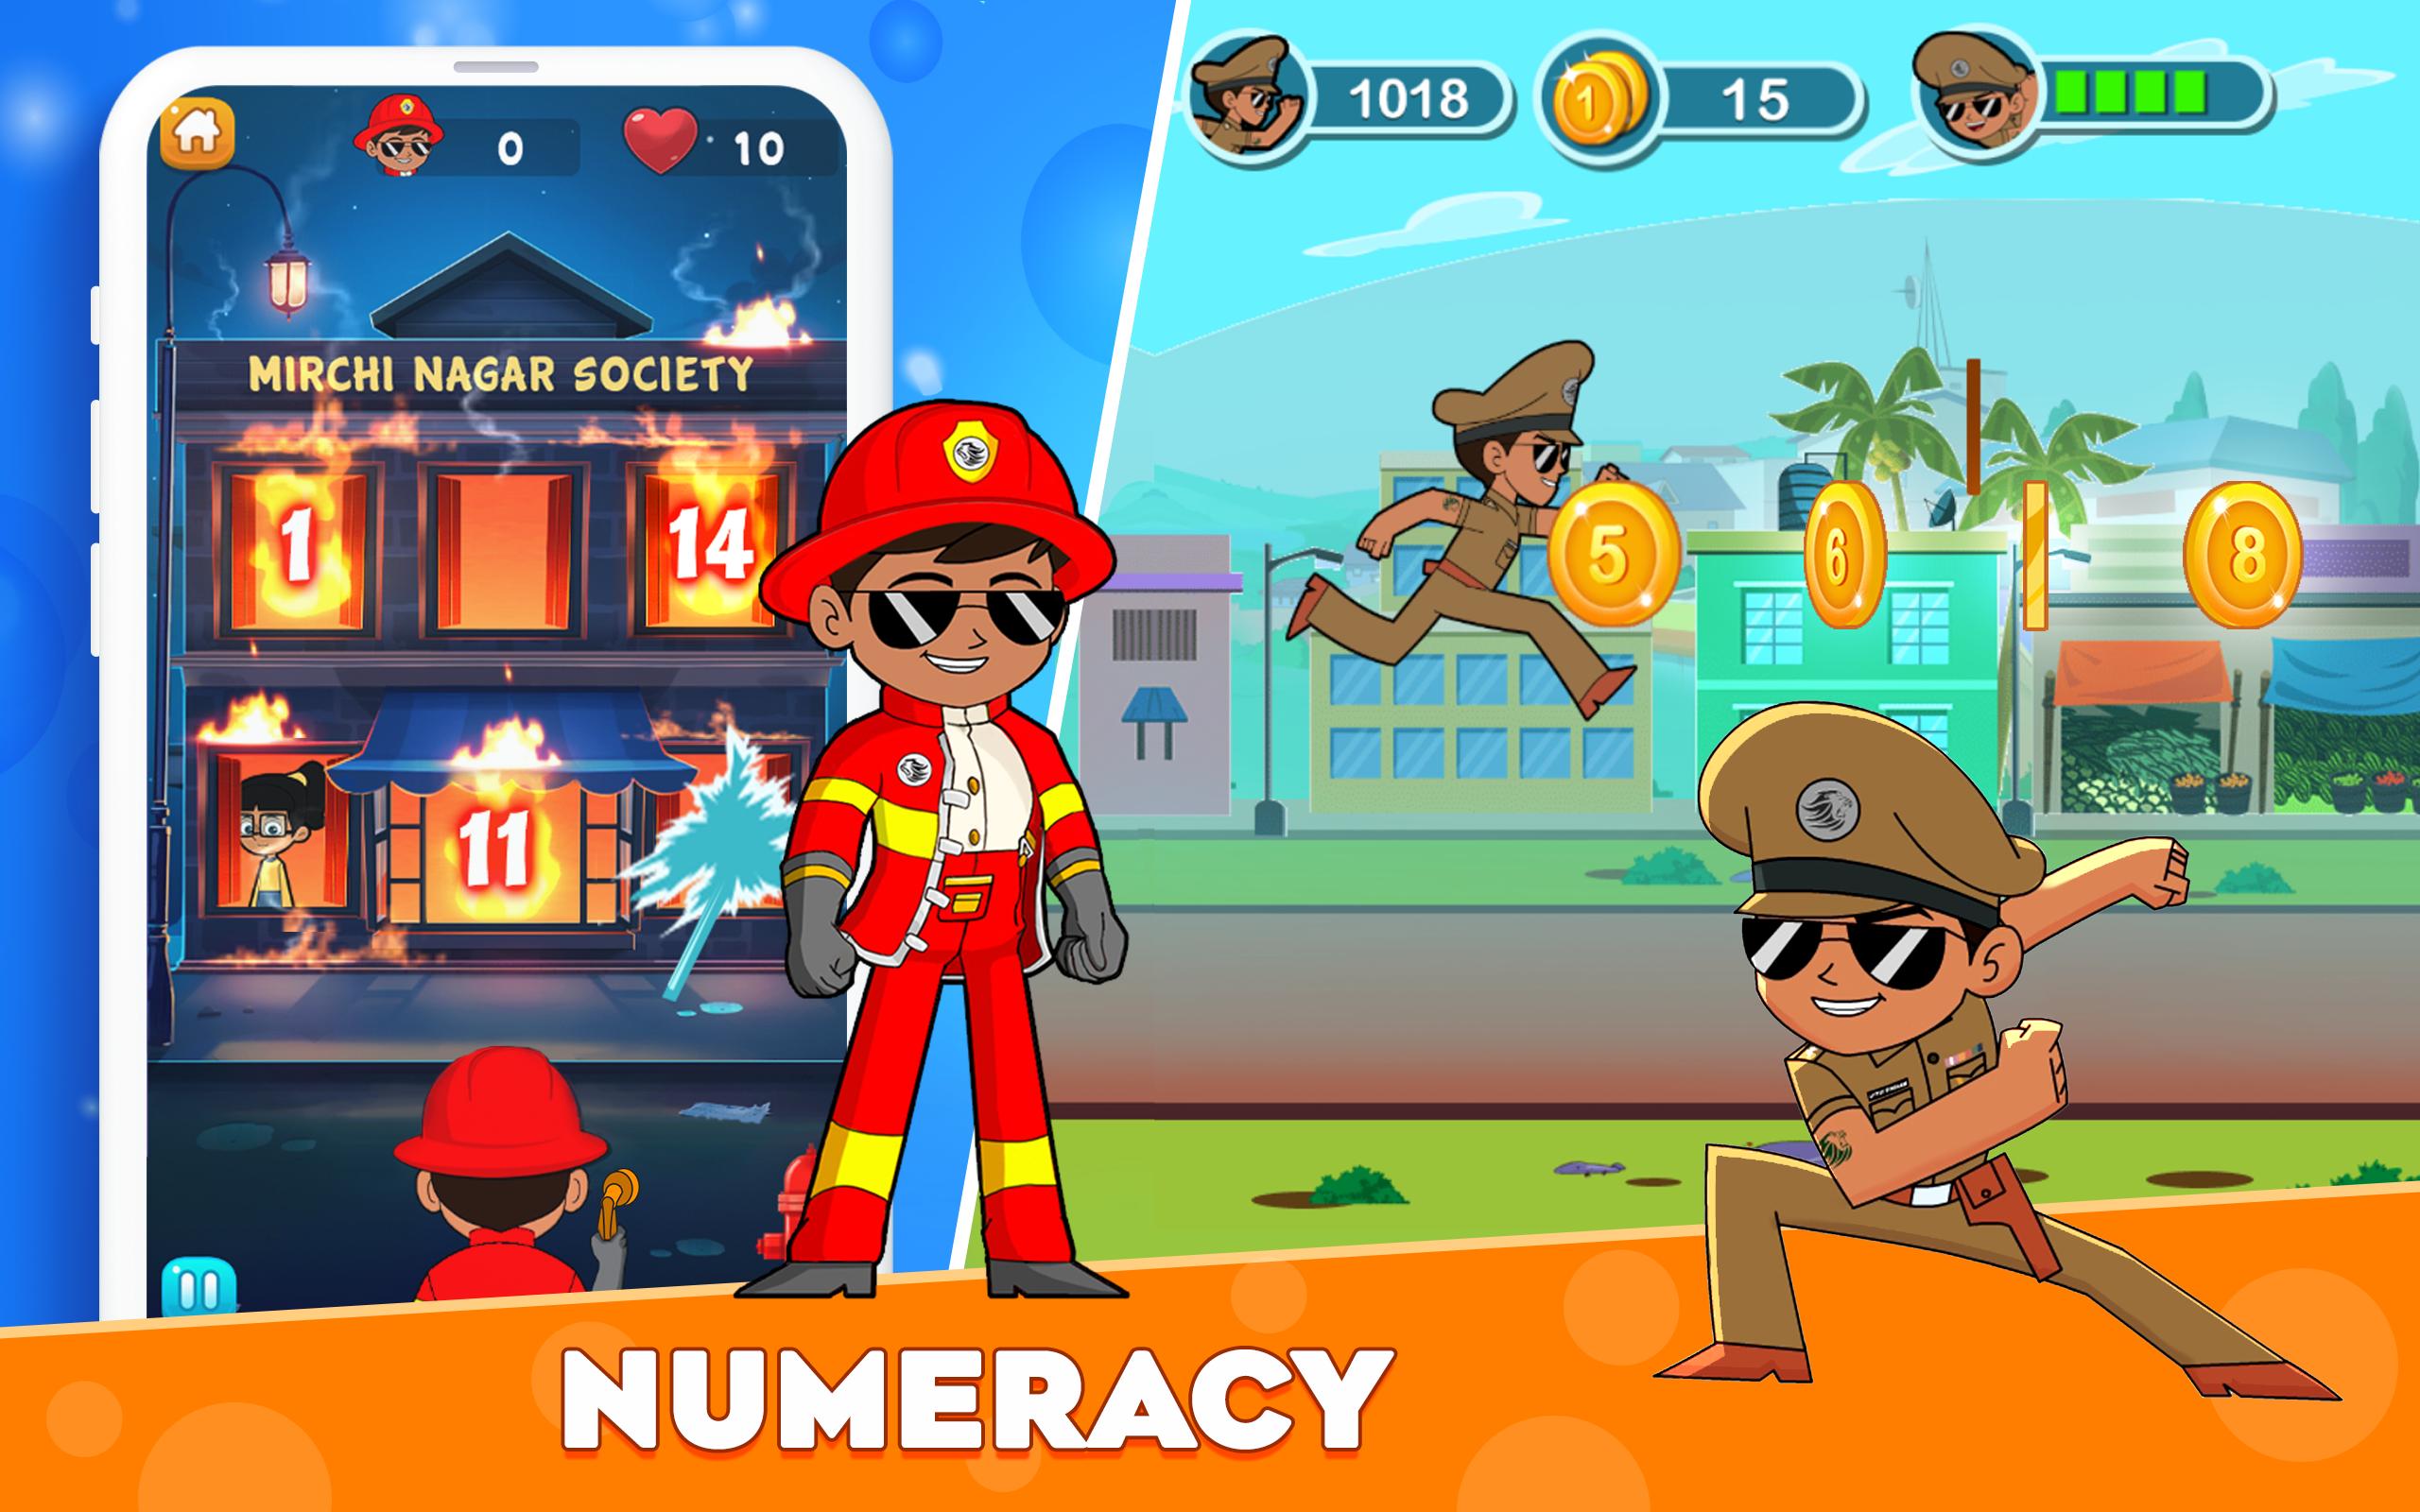 The Only Character-based App For Learning In India 'Little Singham': Why Is  It The Best Choice For Children? - Inventiva